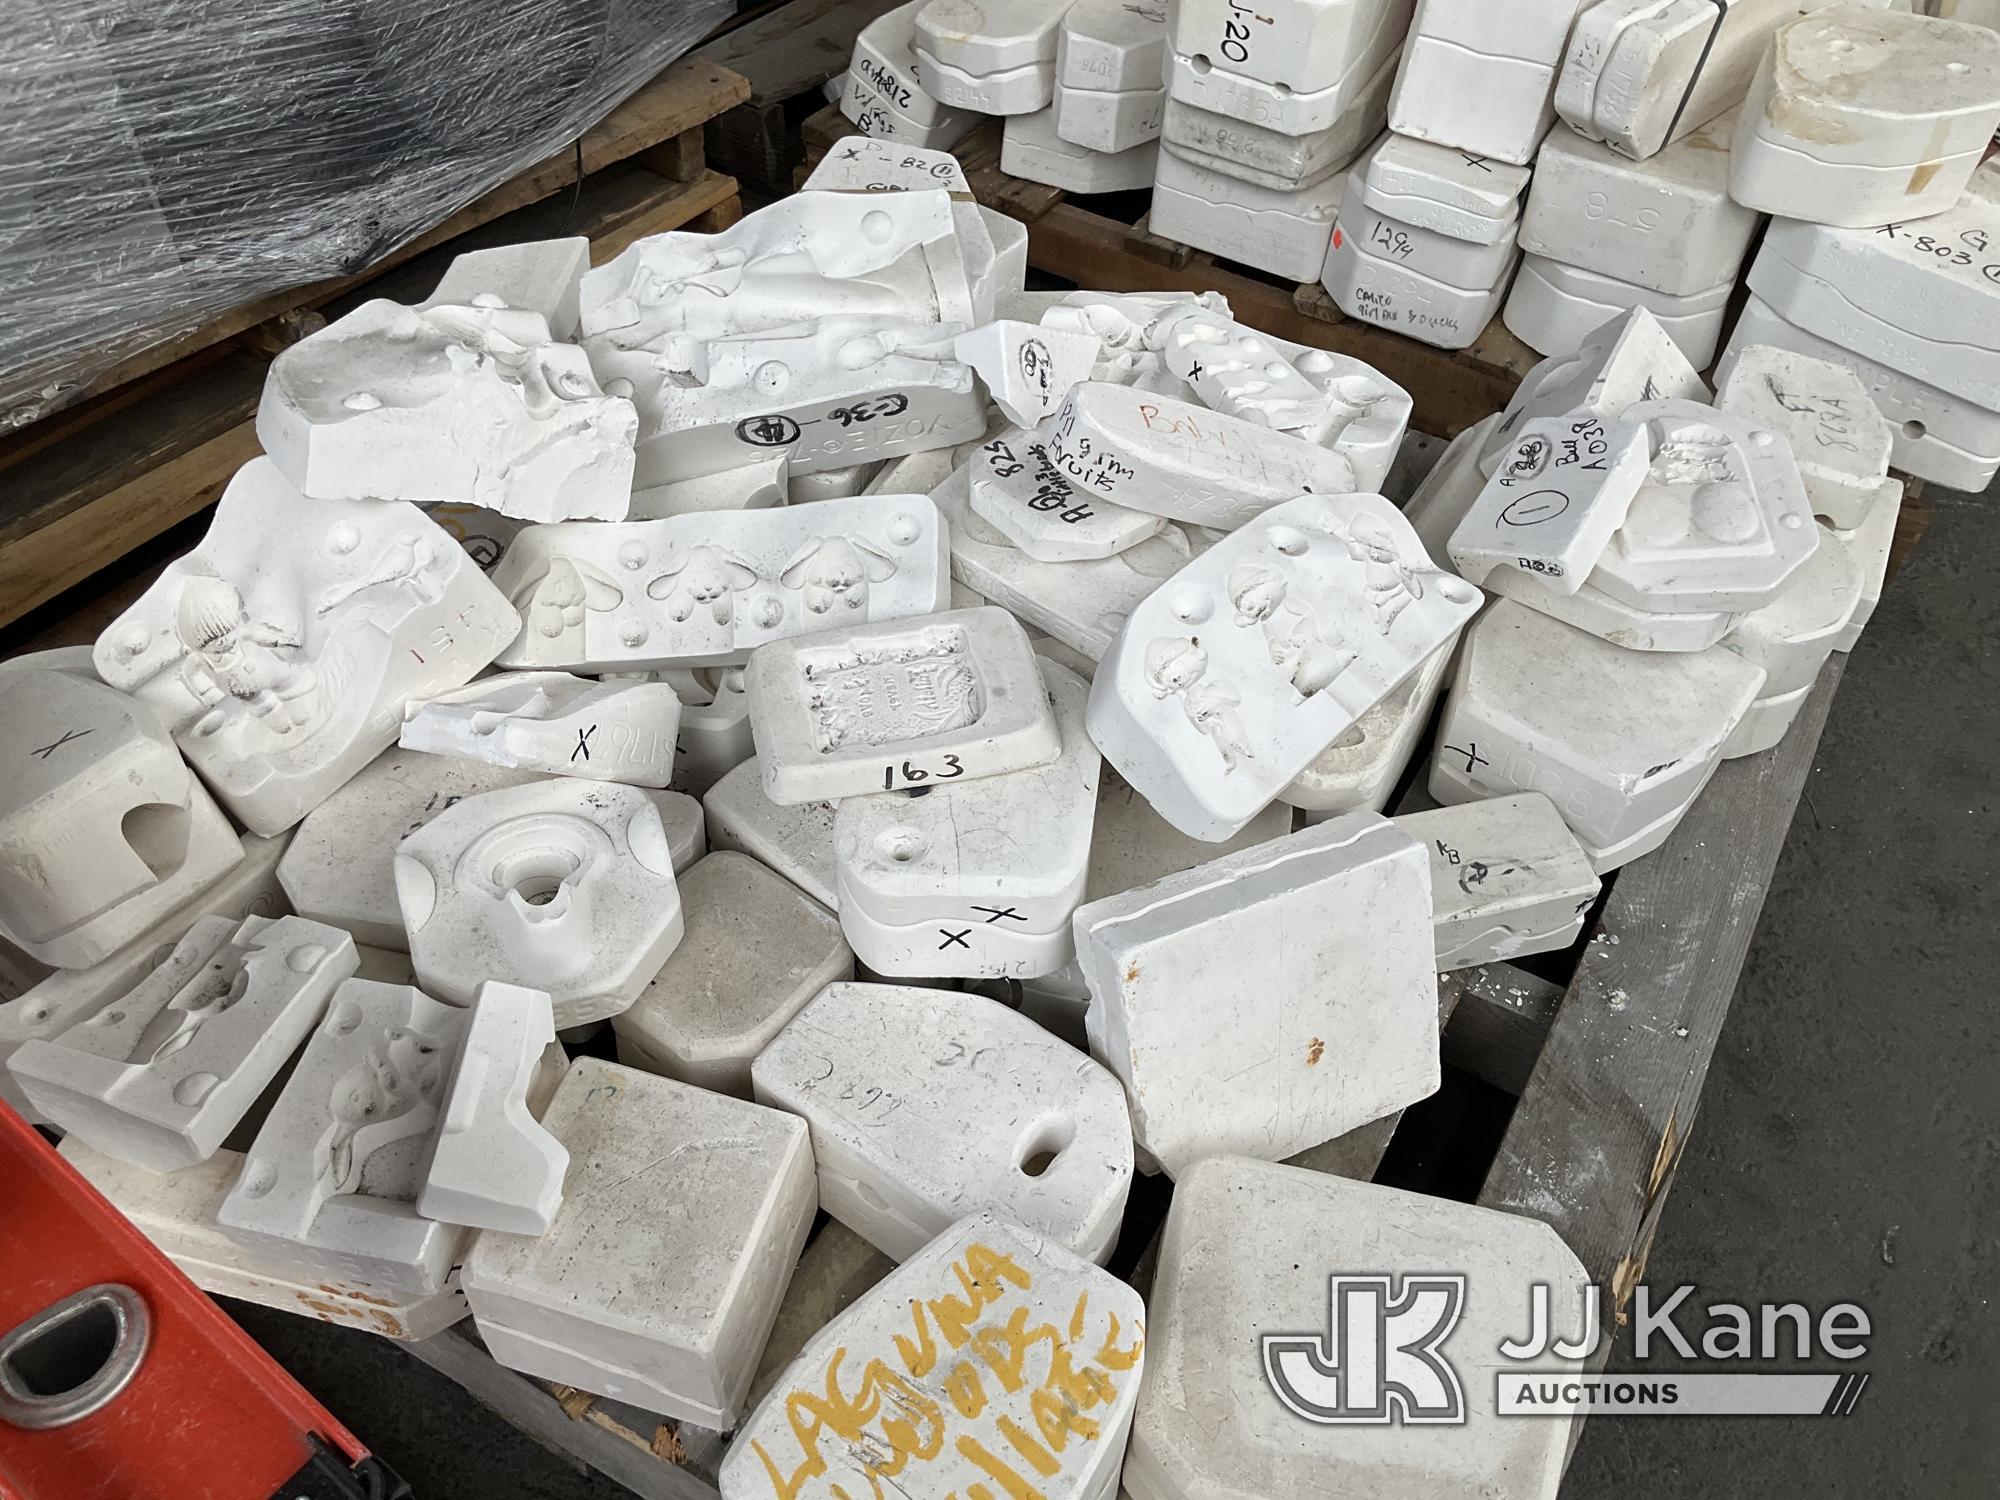 (Jurupa Valley, CA) 2 Pallets Of Clay Moldings (Used) NOTE: This unit is being sold AS IS/WHERE IS v